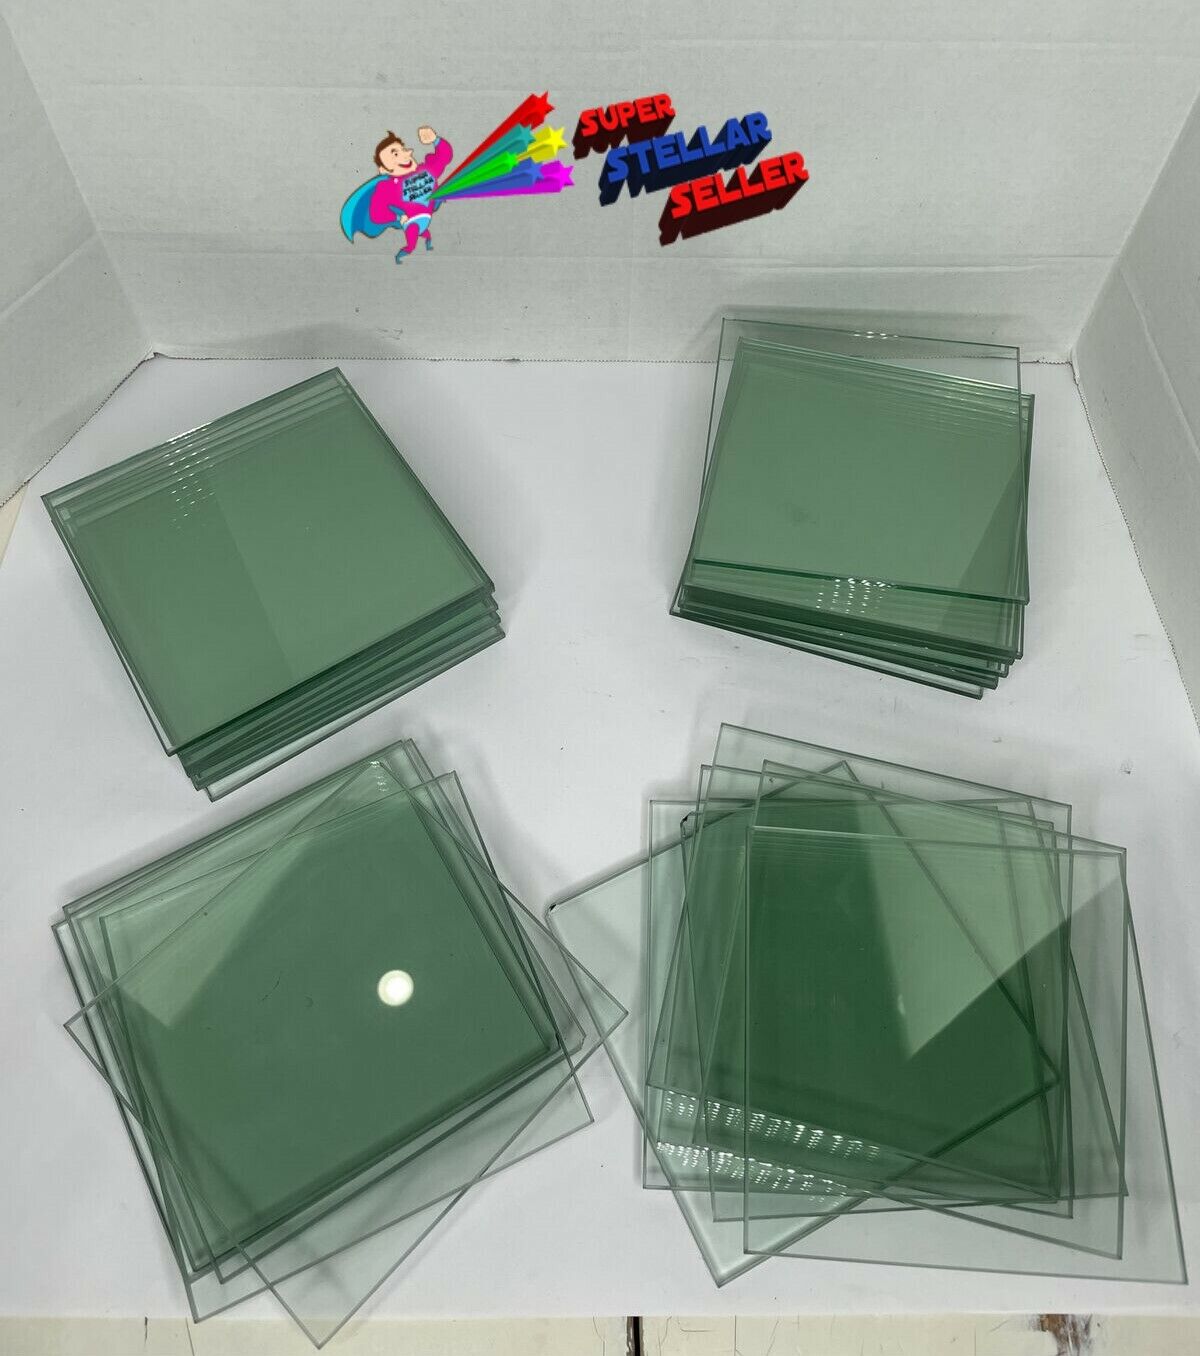 LOT OF 30 -  Square Clear Glass 6" x 6" (nominal) x 6mm Thick - Flat Polish Edge Unbranded Does Not Apply